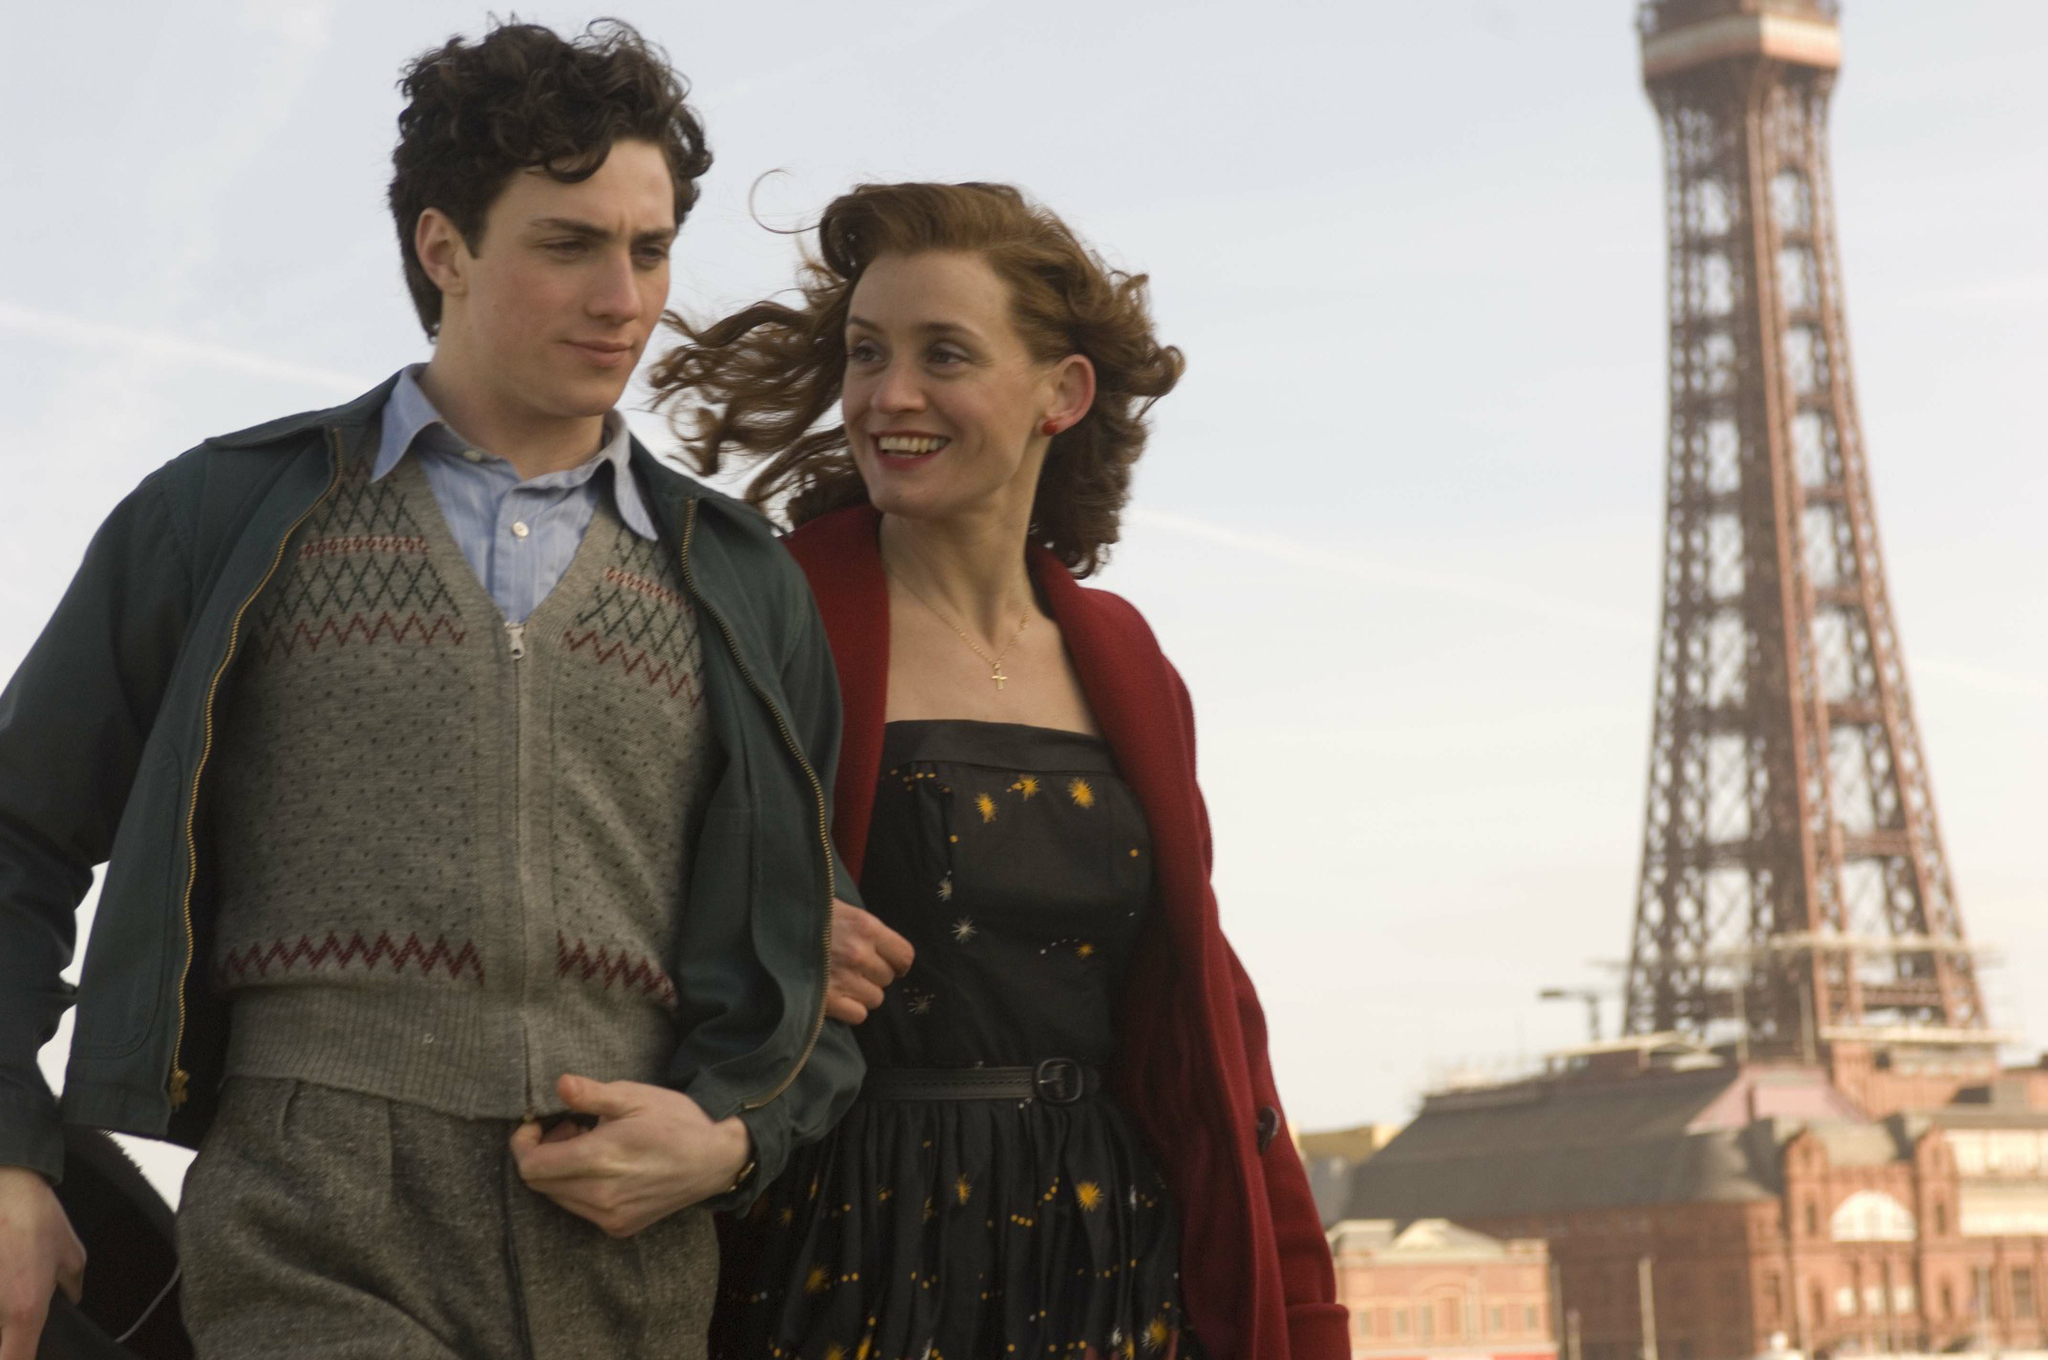 Still of Anne-Marie Duff and Aaron Taylor-Johnson in Nowhere Boy (2009)